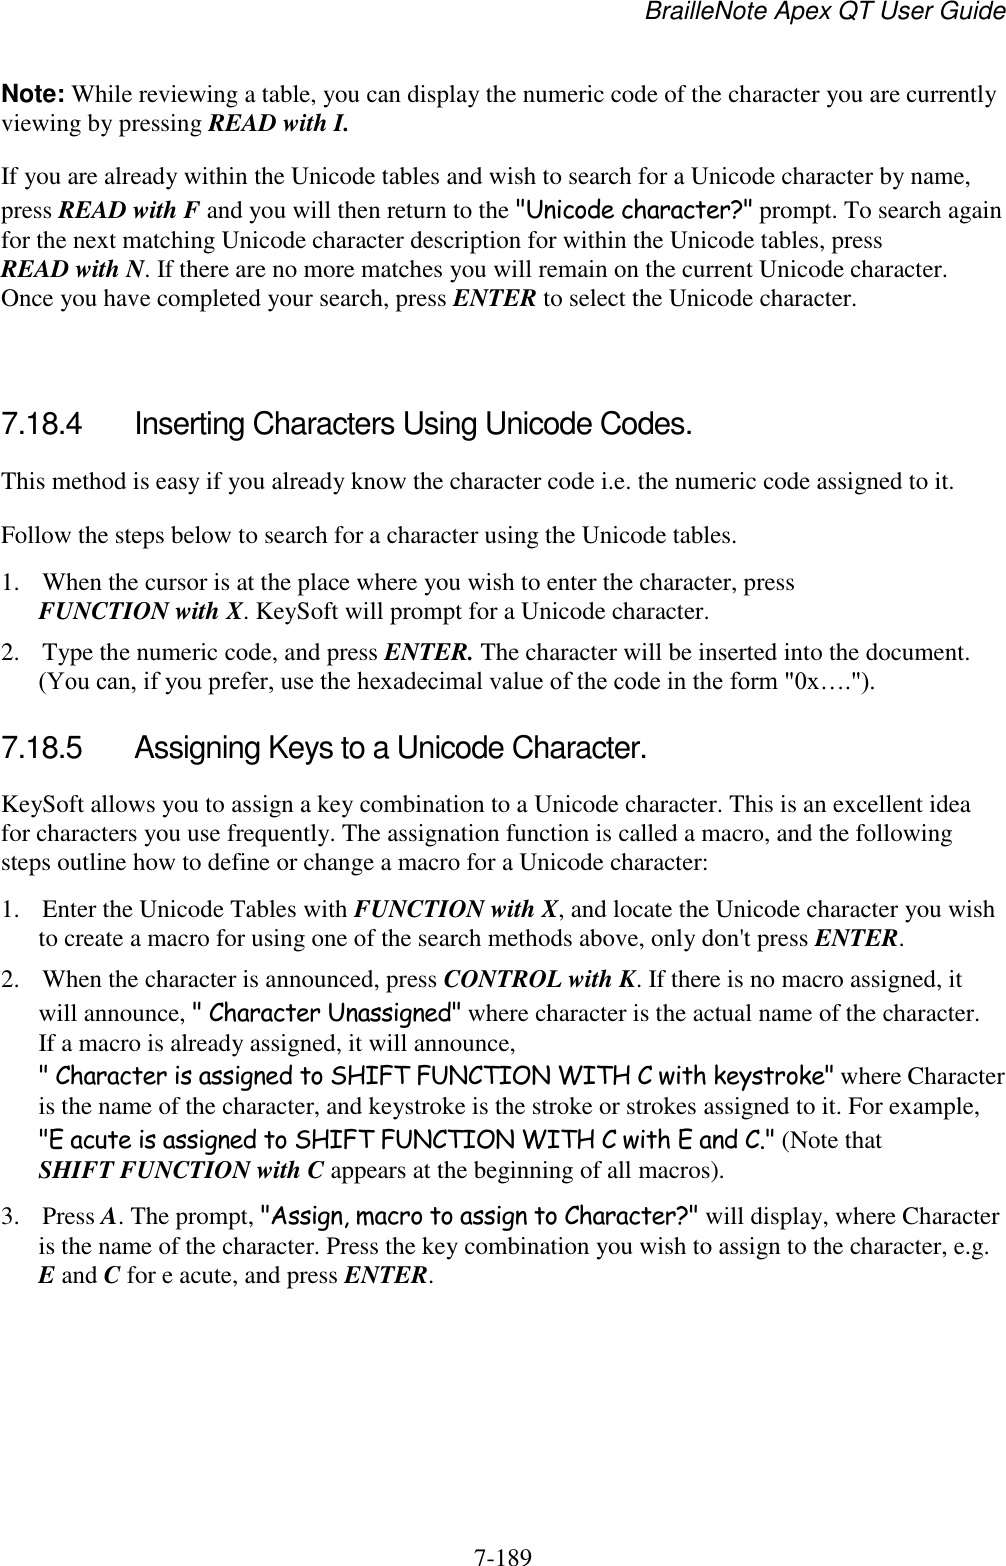 BrailleNote Apex QT User Guide  7-189   Note: While reviewing a table, you can display the numeric code of the character you are currently viewing by pressing READ with I. If you are already within the Unicode tables and wish to search for a Unicode character by name, press READ with F and you will then return to the &quot;Unicode character?&quot; prompt. To search again for the next matching Unicode character description for within the Unicode tables, press READ with N. If there are no more matches you will remain on the current Unicode character. Once you have completed your search, press ENTER to select the Unicode character.   7.18.4  Inserting Characters Using Unicode Codes. This method is easy if you already know the character code i.e. the numeric code assigned to it. Follow the steps below to search for a character using the Unicode tables. 1. When the cursor is at the place where you wish to enter the character, press FUNCTION with X. KeySoft will prompt for a Unicode character. 2. Type the numeric code, and press ENTER. The character will be inserted into the document. (You can, if you prefer, use the hexadecimal value of the code in the form &quot;0x….&quot;).  7.18.5  Assigning Keys to a Unicode Character. KeySoft allows you to assign a key combination to a Unicode character. This is an excellent idea for characters you use frequently. The assignation function is called a macro, and the following steps outline how to define or change a macro for a Unicode character: 1. Enter the Unicode Tables with FUNCTION with X, and locate the Unicode character you wish to create a macro for using one of the search methods above, only don&apos;t press ENTER. 2. When the character is announced, press CONTROL with K. If there is no macro assigned, it will announce, &quot; Character Unassigned&quot; where character is the actual name of the character.  If a macro is already assigned, it will announce, &quot; Character is assigned to SHIFT FUNCTION WITH C with keystroke&quot; where Character is the name of the character, and keystroke is the stroke or strokes assigned to it. For example, &quot;E acute is assigned to SHIFT FUNCTION WITH C with E and C.&quot; (Note that SHIFT FUNCTION with C appears at the beginning of all macros). 3. Press A. The prompt, &quot;Assign, macro to assign to Character?&quot; will display, where Character is the name of the character. Press the key combination you wish to assign to the character, e.g. E and C for e acute, and press ENTER. 